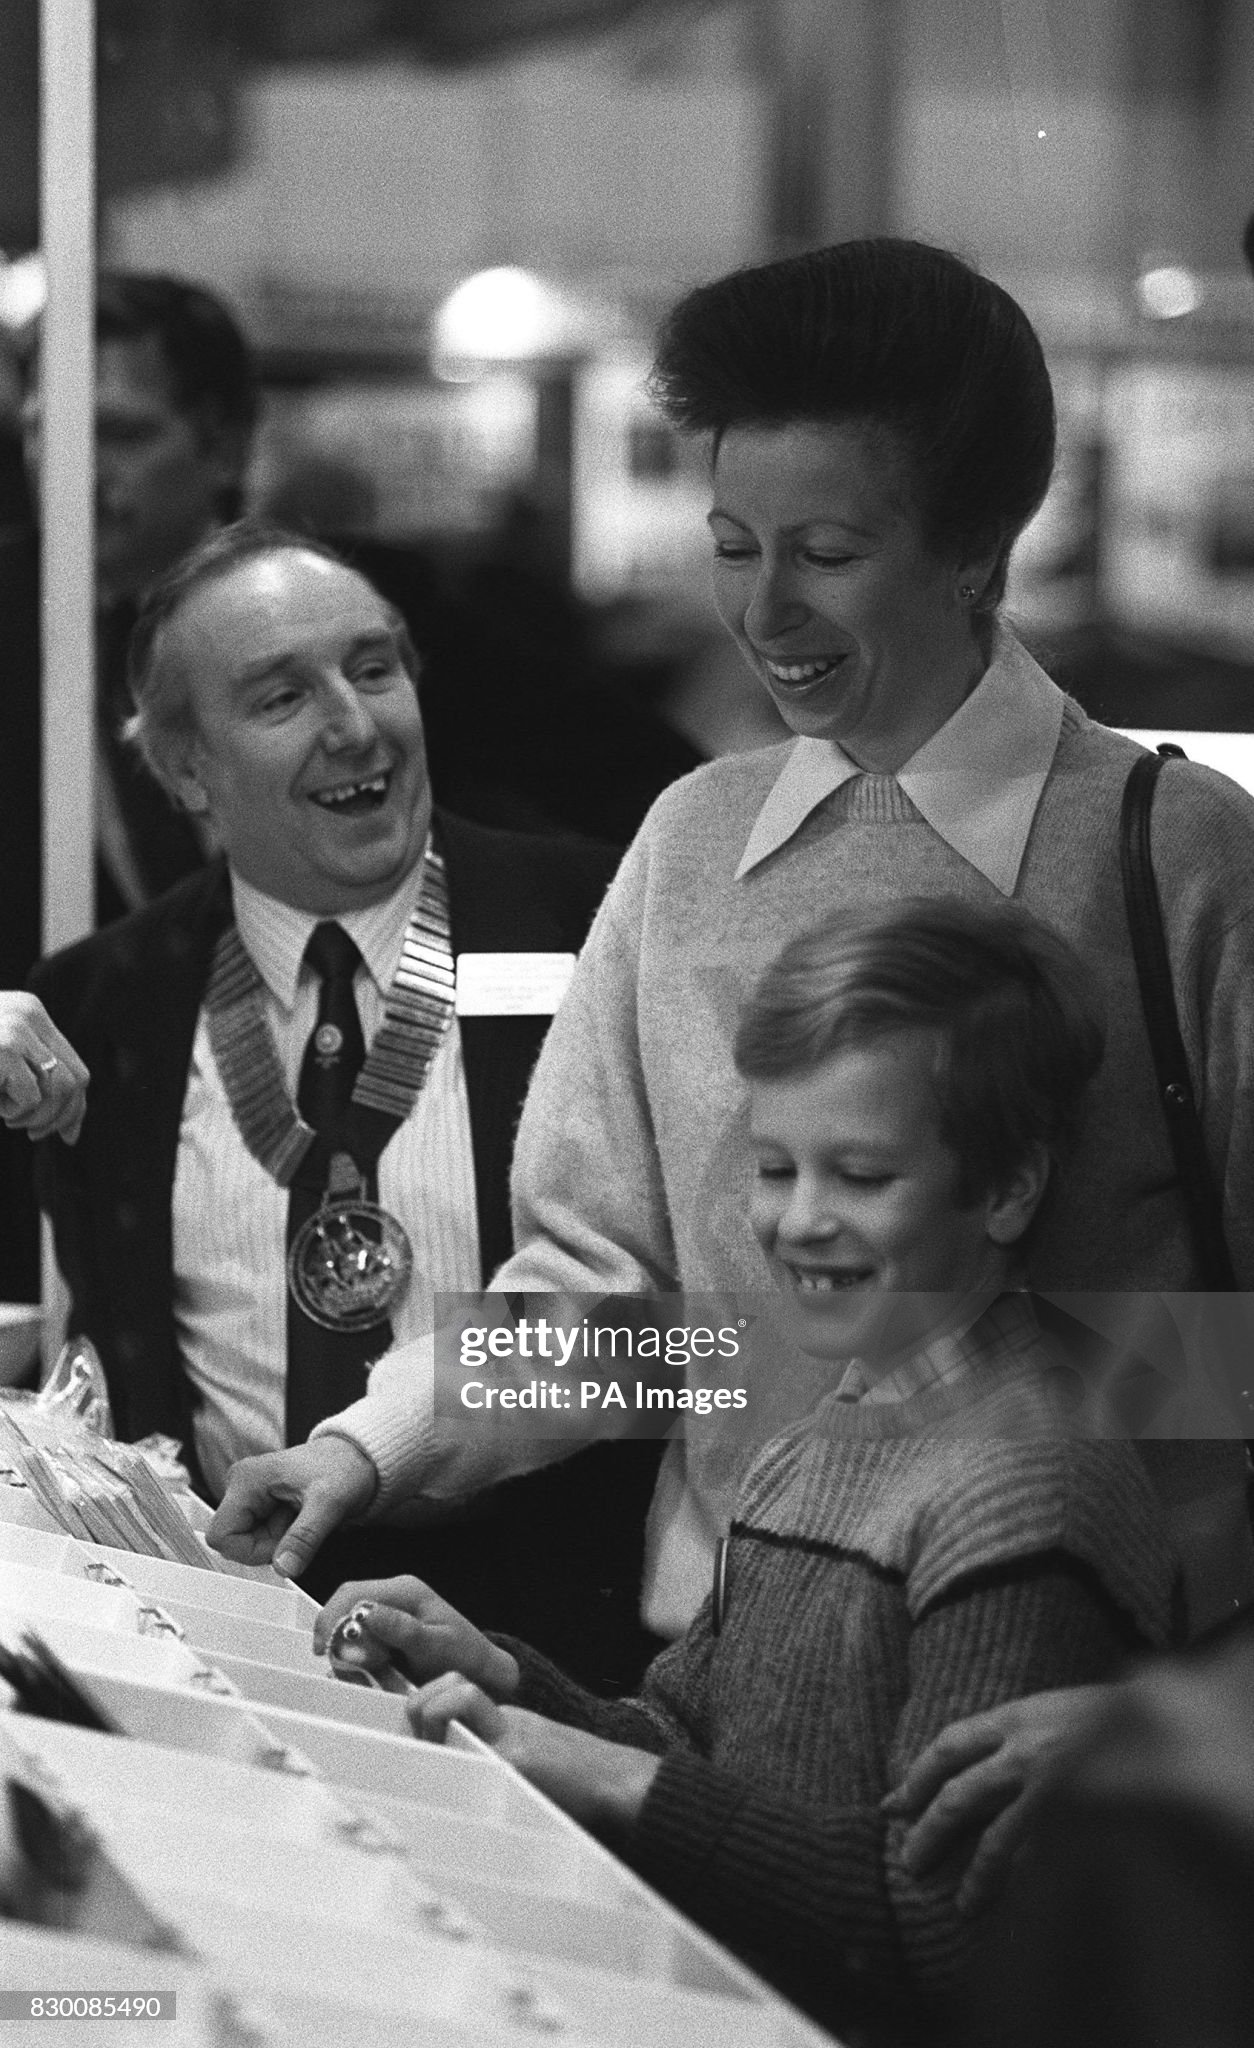 pa-news-photo-11-1-87-princess-anne-shares-a-joke-with-mr-george-hulley-president-of-the.jpg